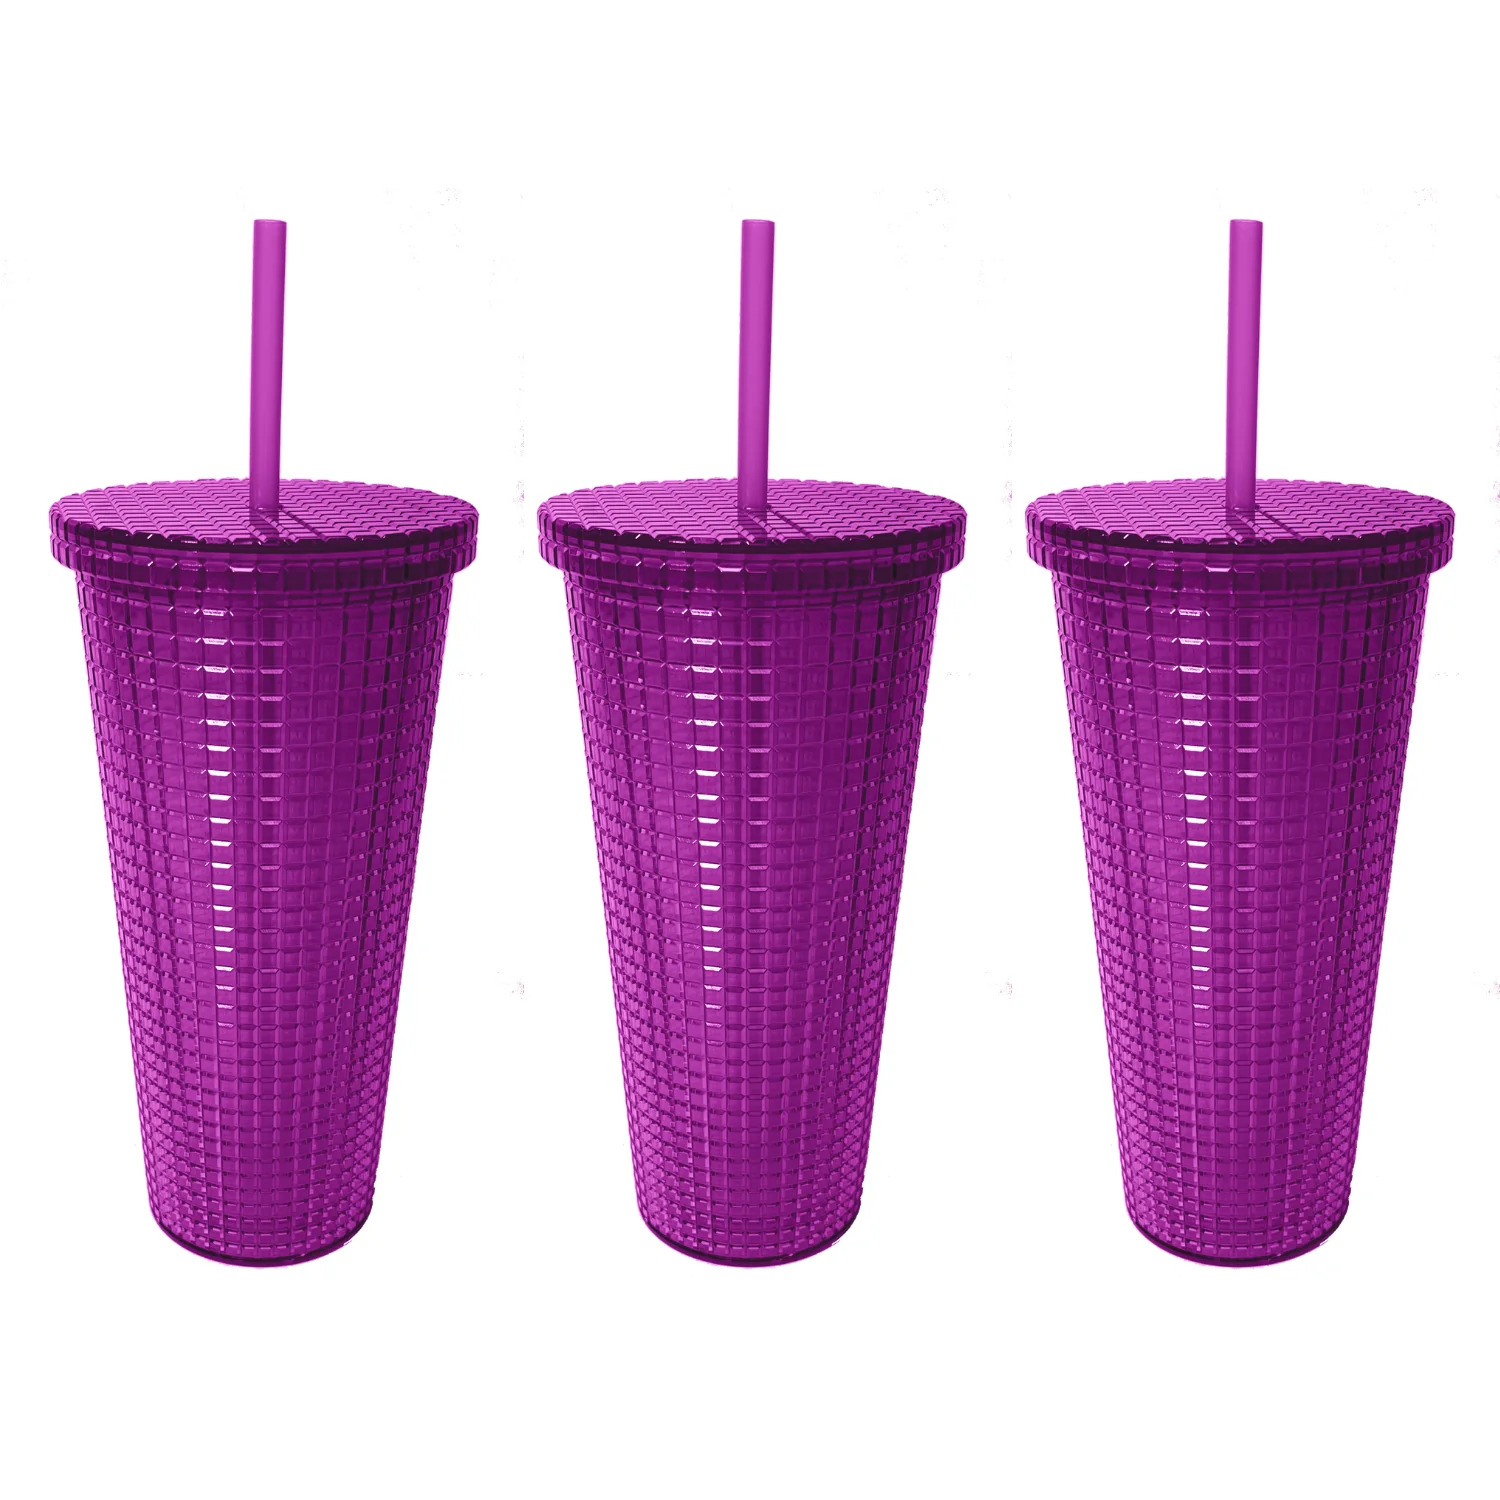 Cool Gear 3-Pack 23 oz Jem Chiller with Reusable Straw | Dishwasher Safe, Spillproof, Double-Wall Insulated Travel Tumbler | Trendy, Textured Design - Plum Pack - image 1 of 2